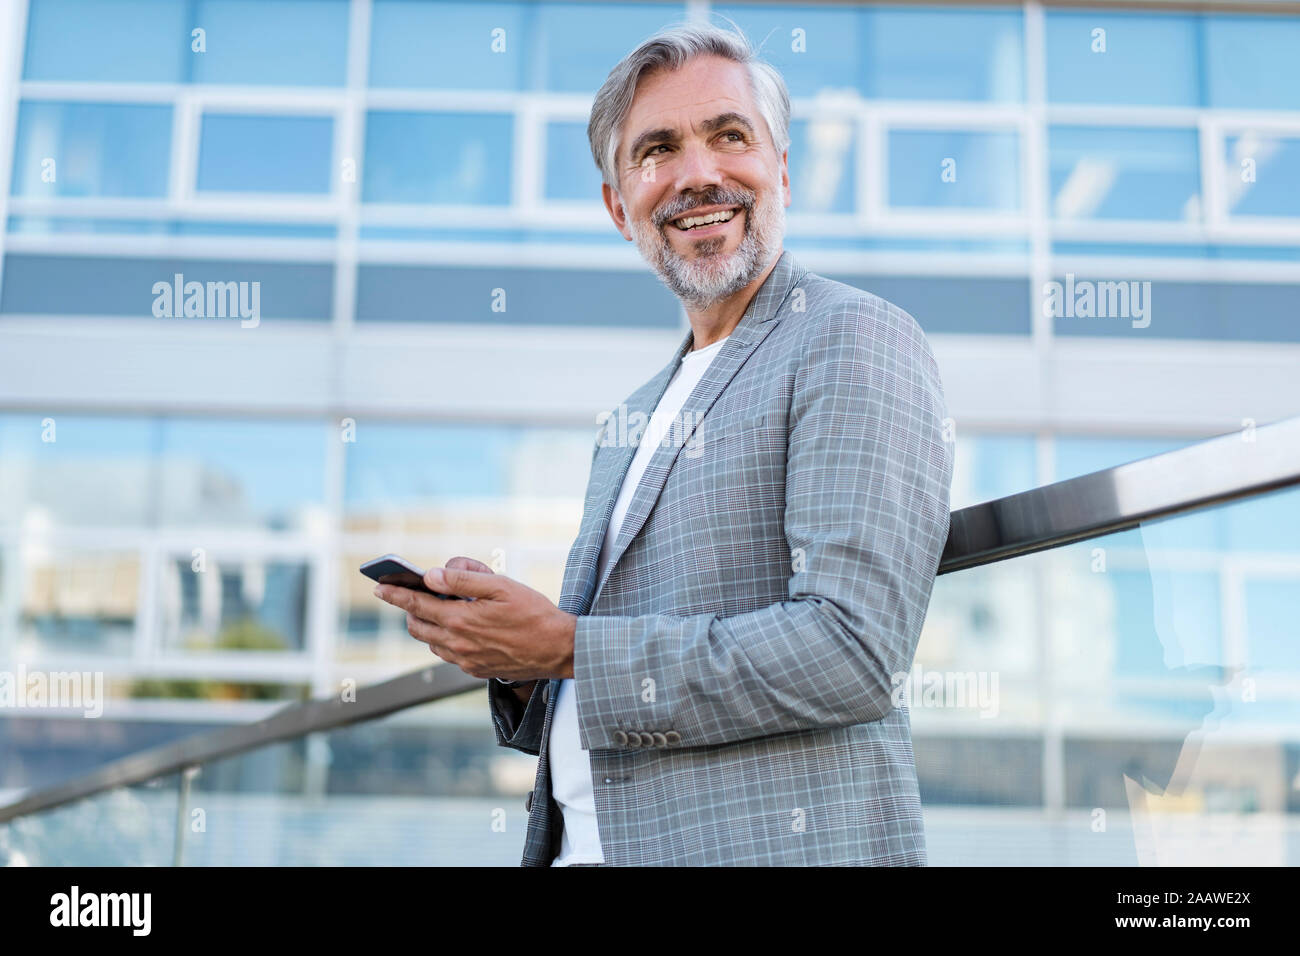 Smiling mature businessman with cell phone outdoors Stock Photo